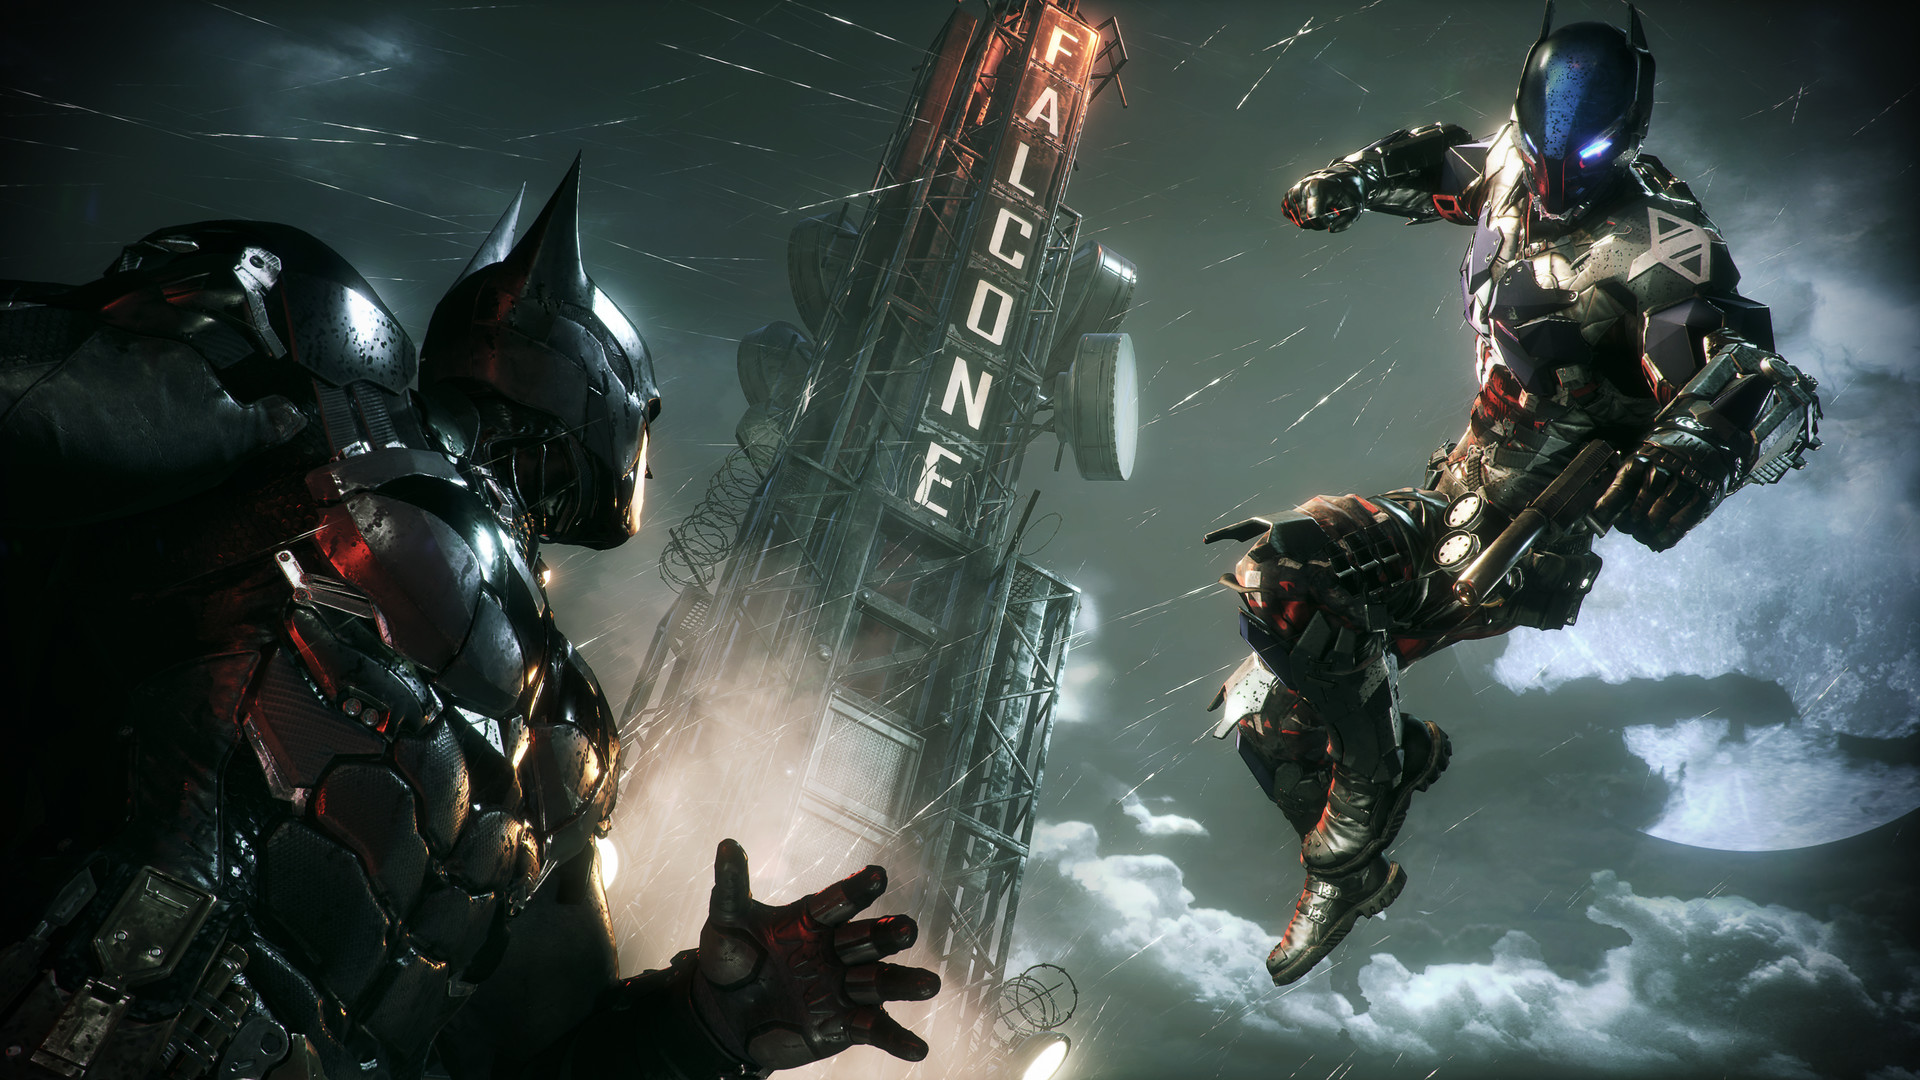 Top 10 games to play for PS Plus subscribers - Batman: Arkham Knight